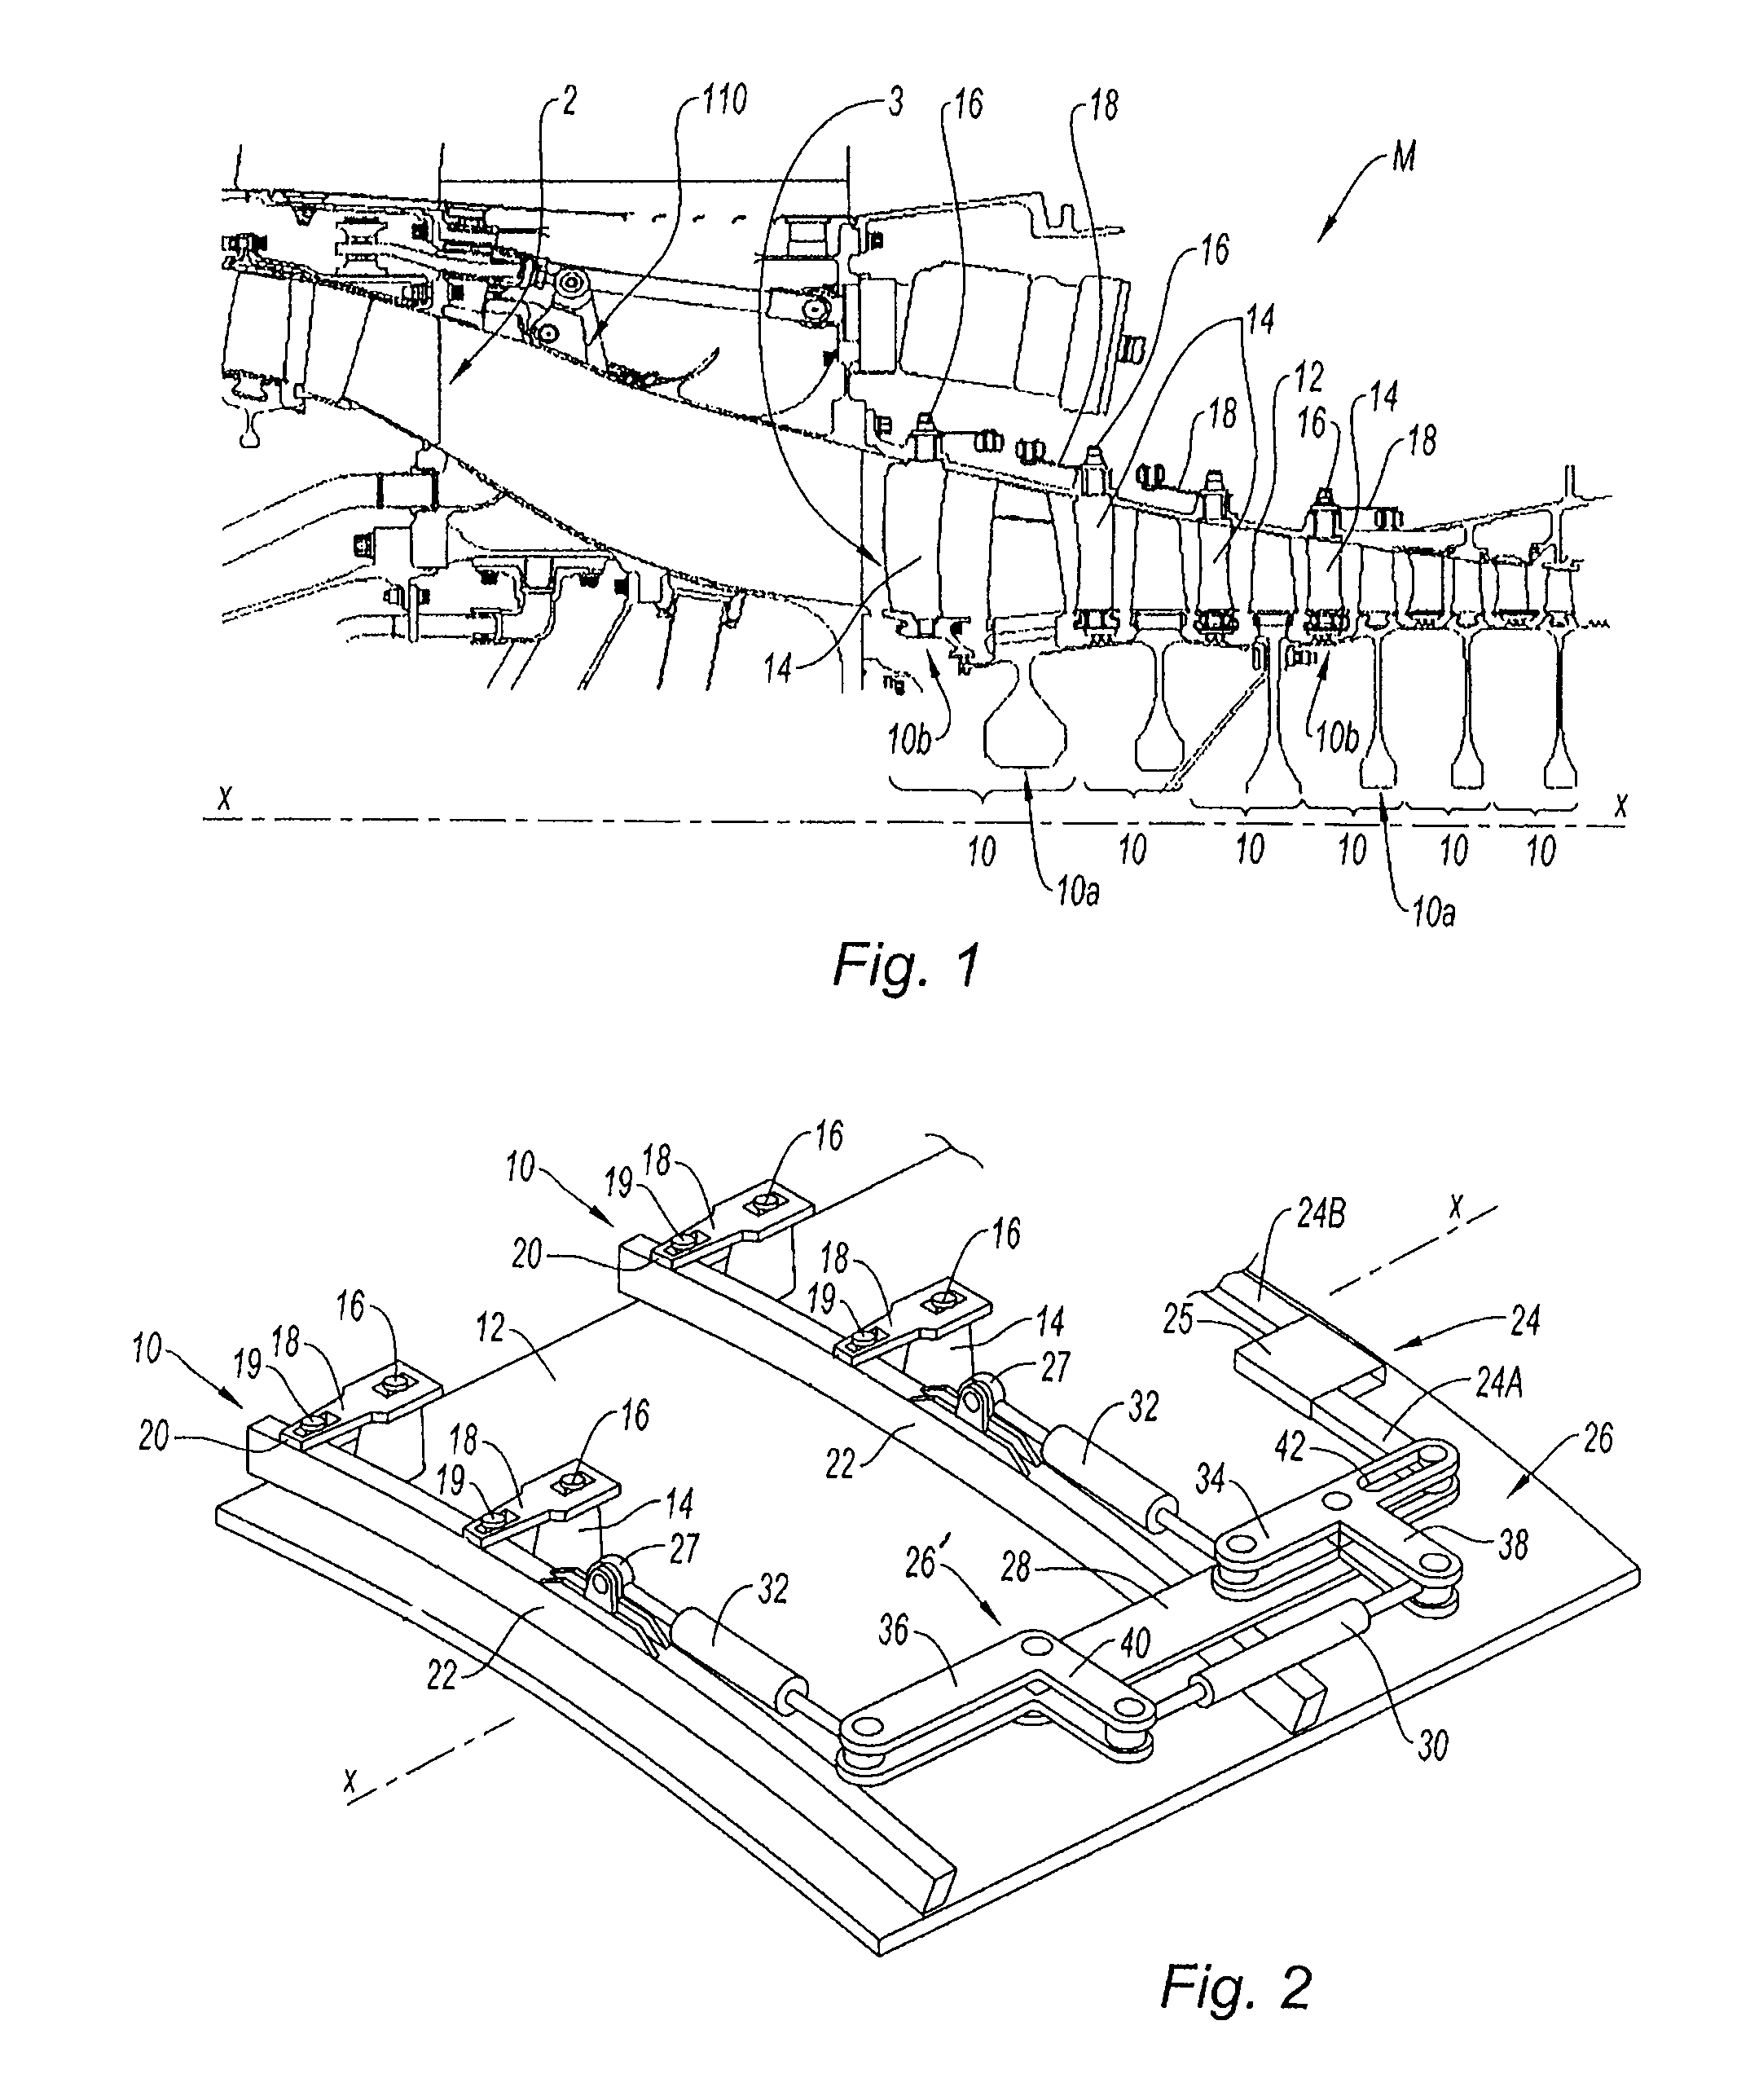 System for controlling at least two variable-geometry equipments of a gas turbine engine, particularly by rack